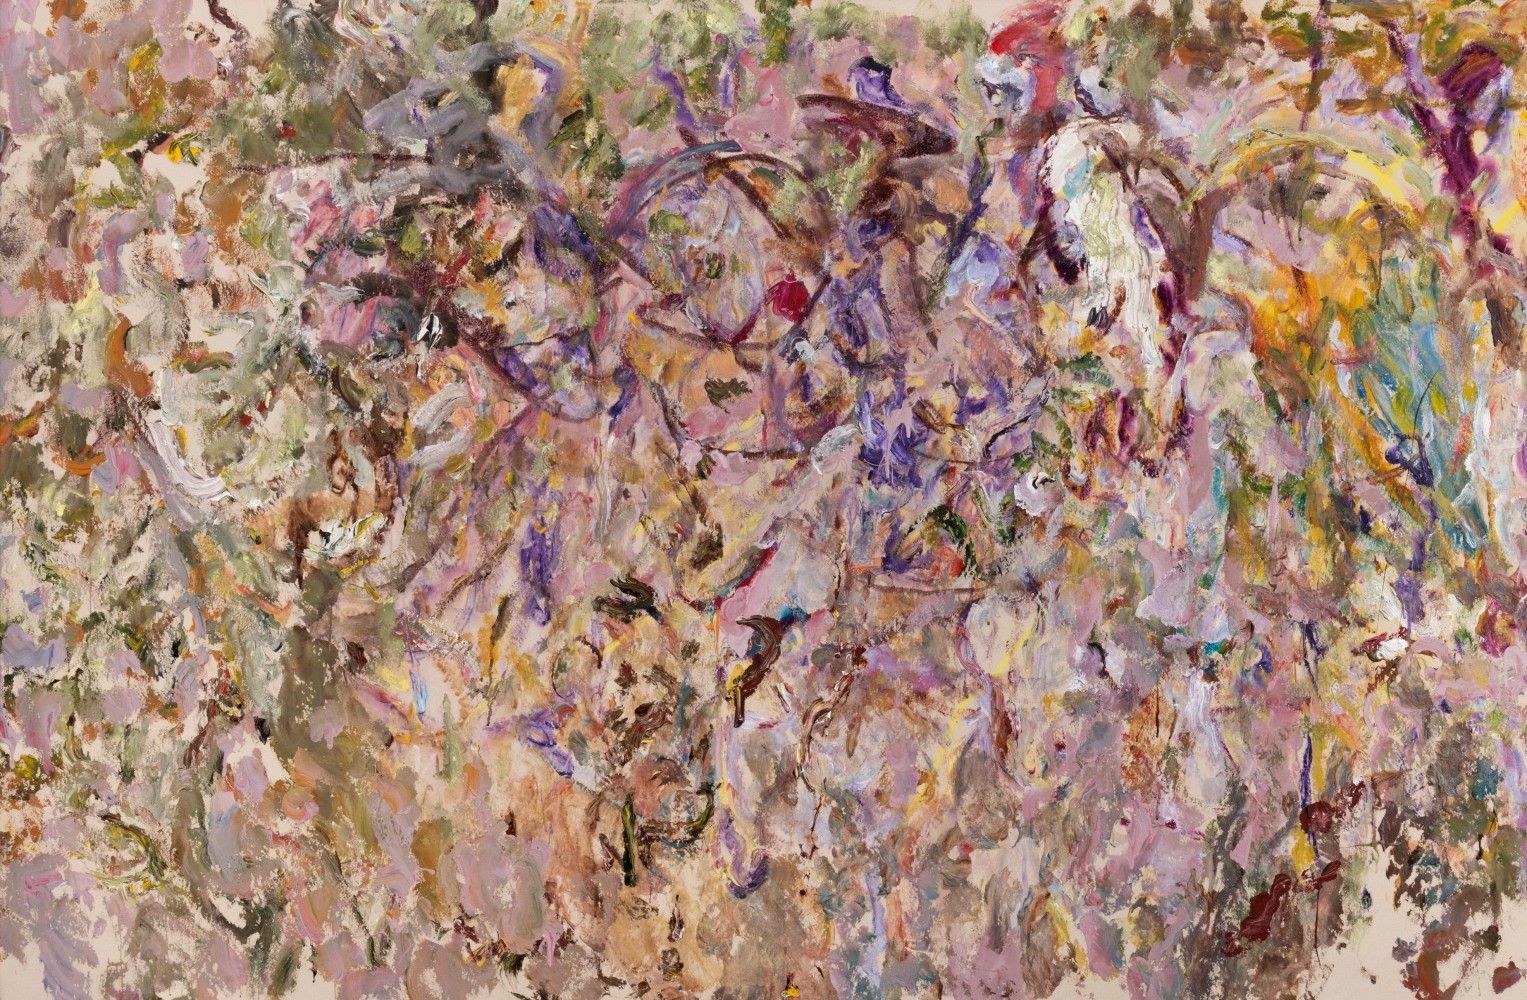 LARRY POONS (b. 1937)

Untitled (024C-4)

2024

Acrylic on canvas

65 1/2 x 67 inches

166.4 x 170.2cm